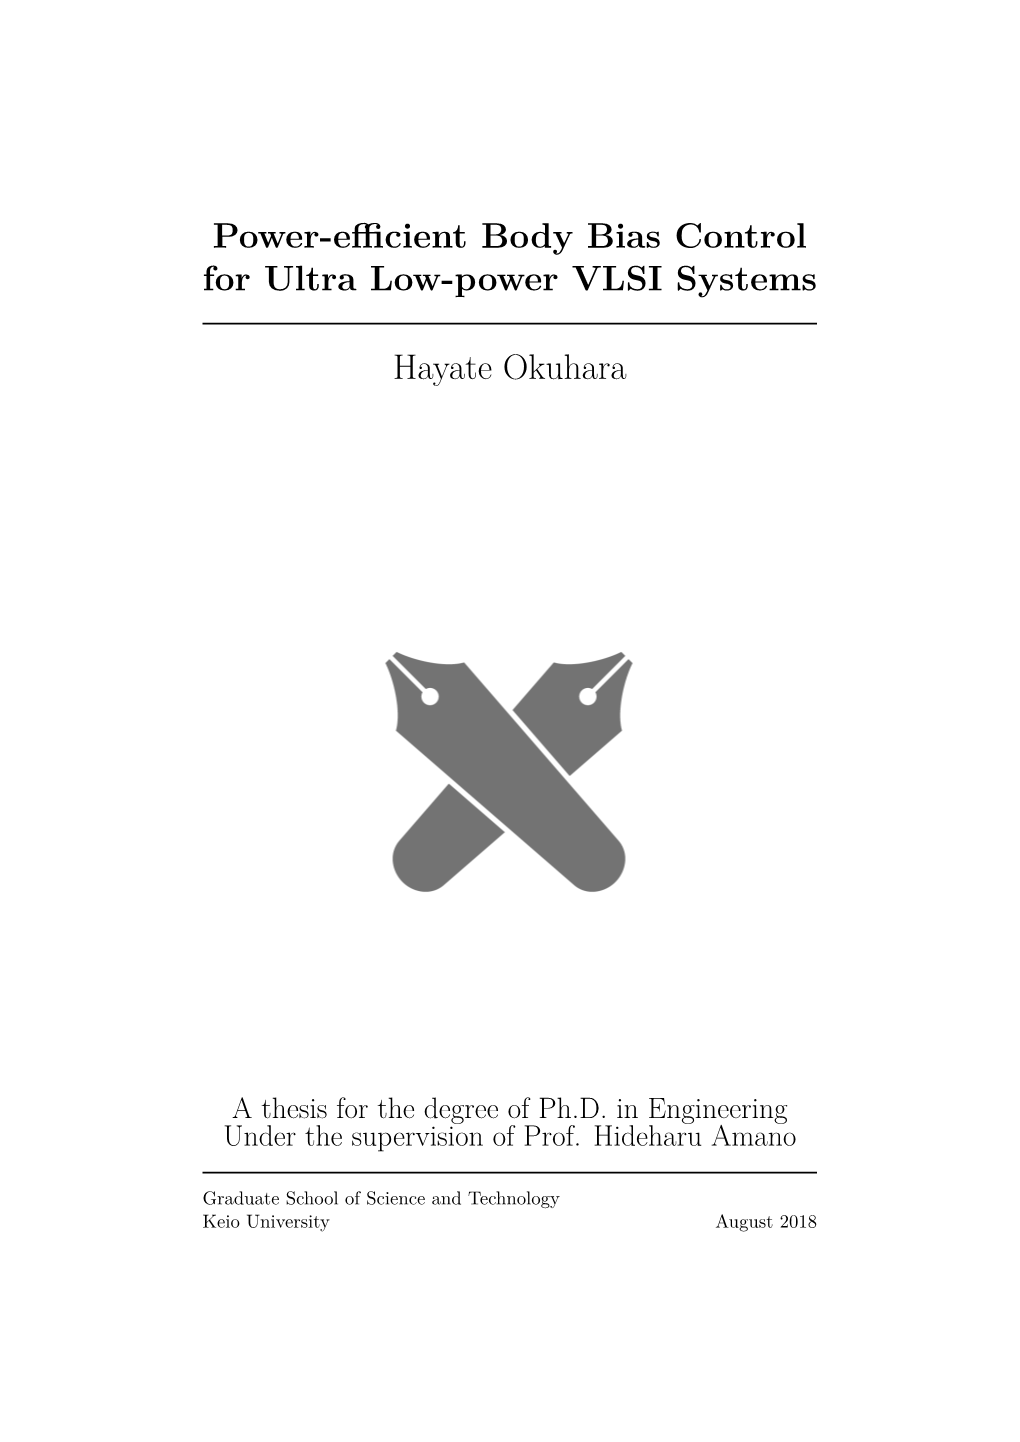 Power-Efficient Body Bias Control for Ultra Low-Power VLSI Systems(本文)